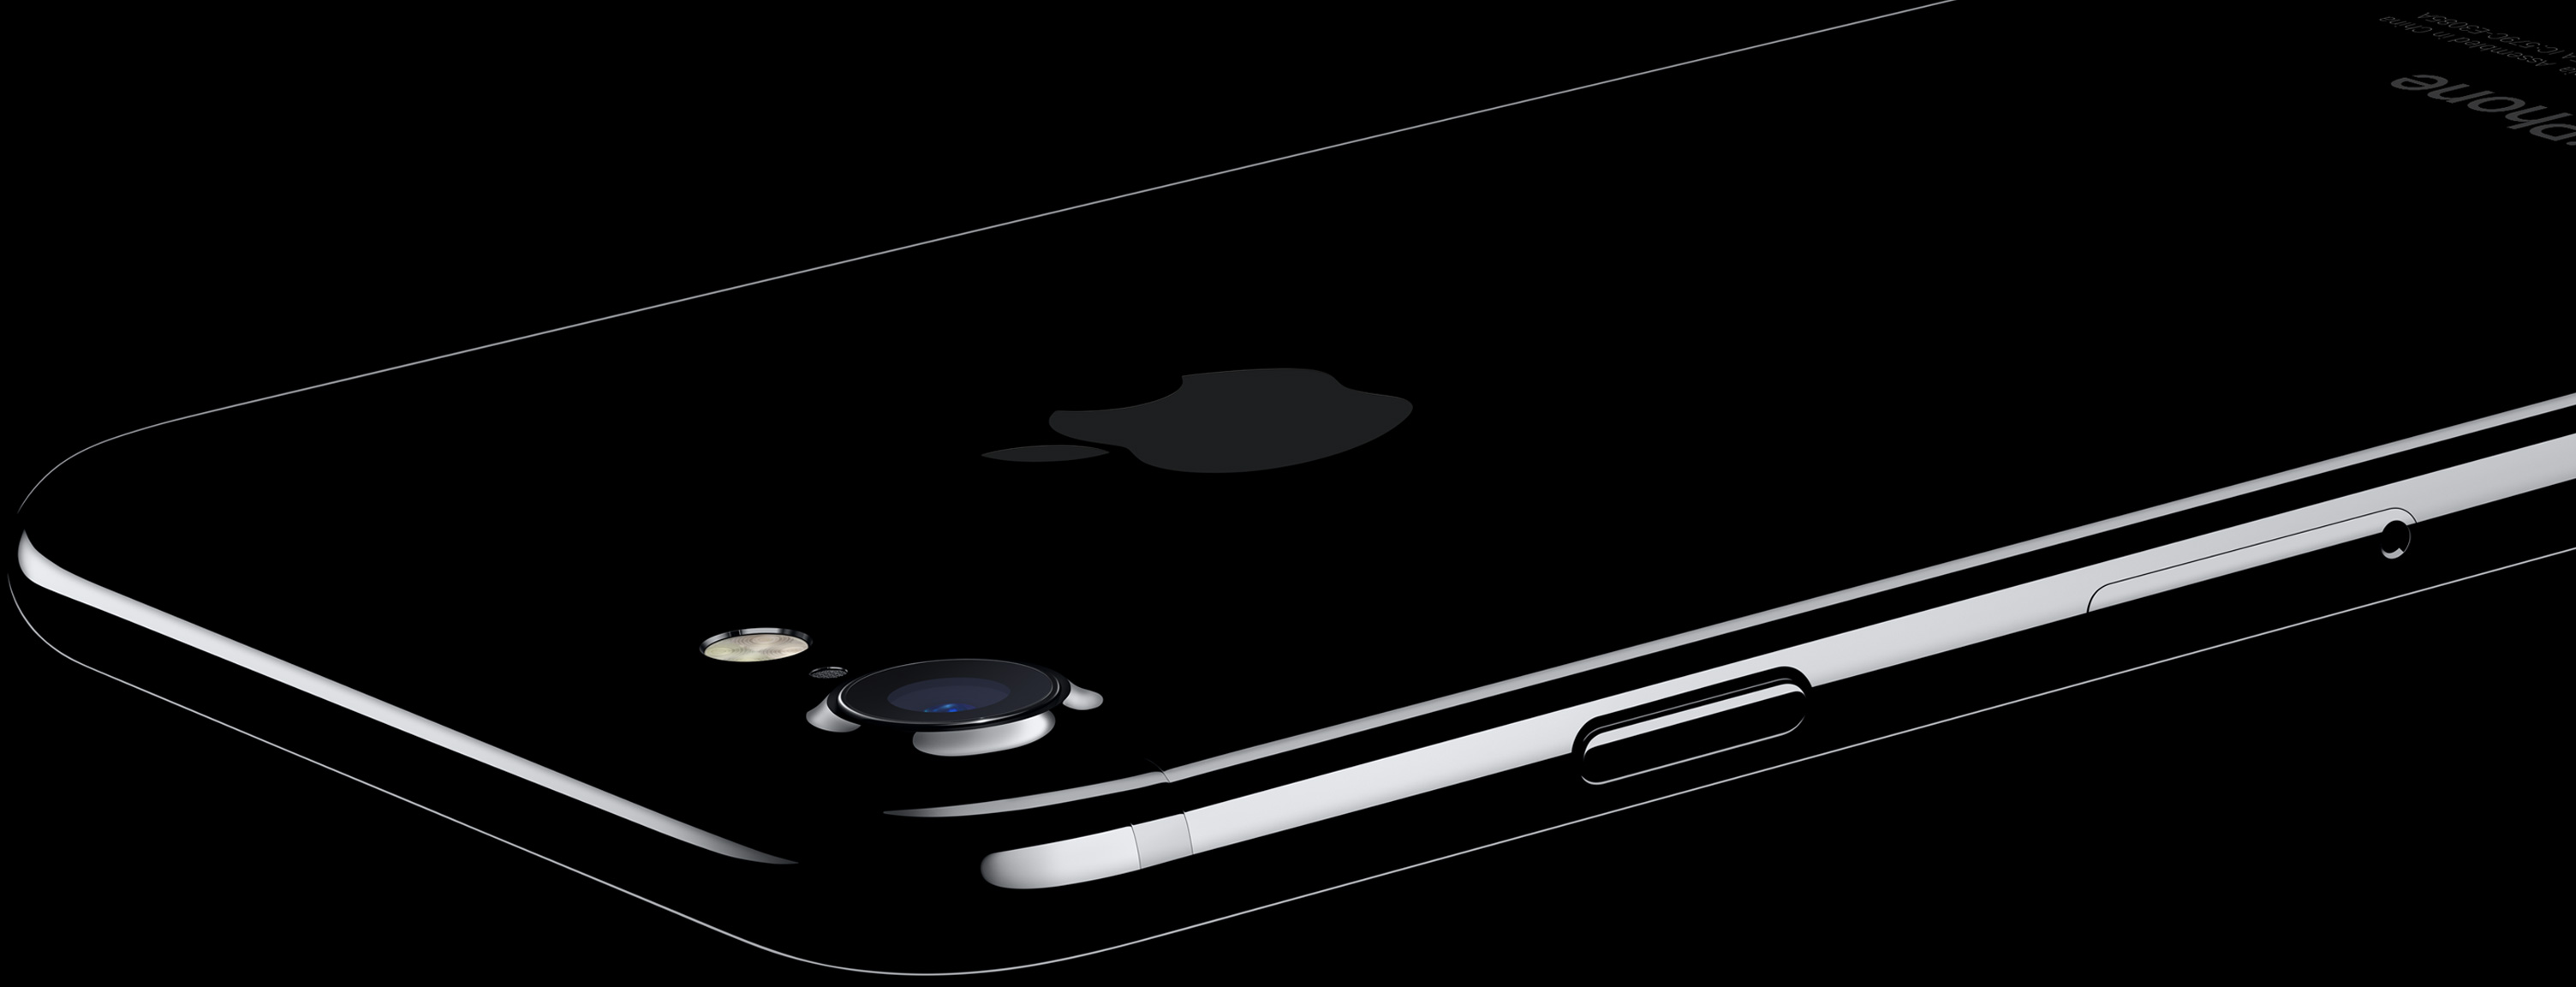 Closeup PR image of the rear of an iPhone 7 in jet black finish, used to illustrate the report about titanium iPhone 14